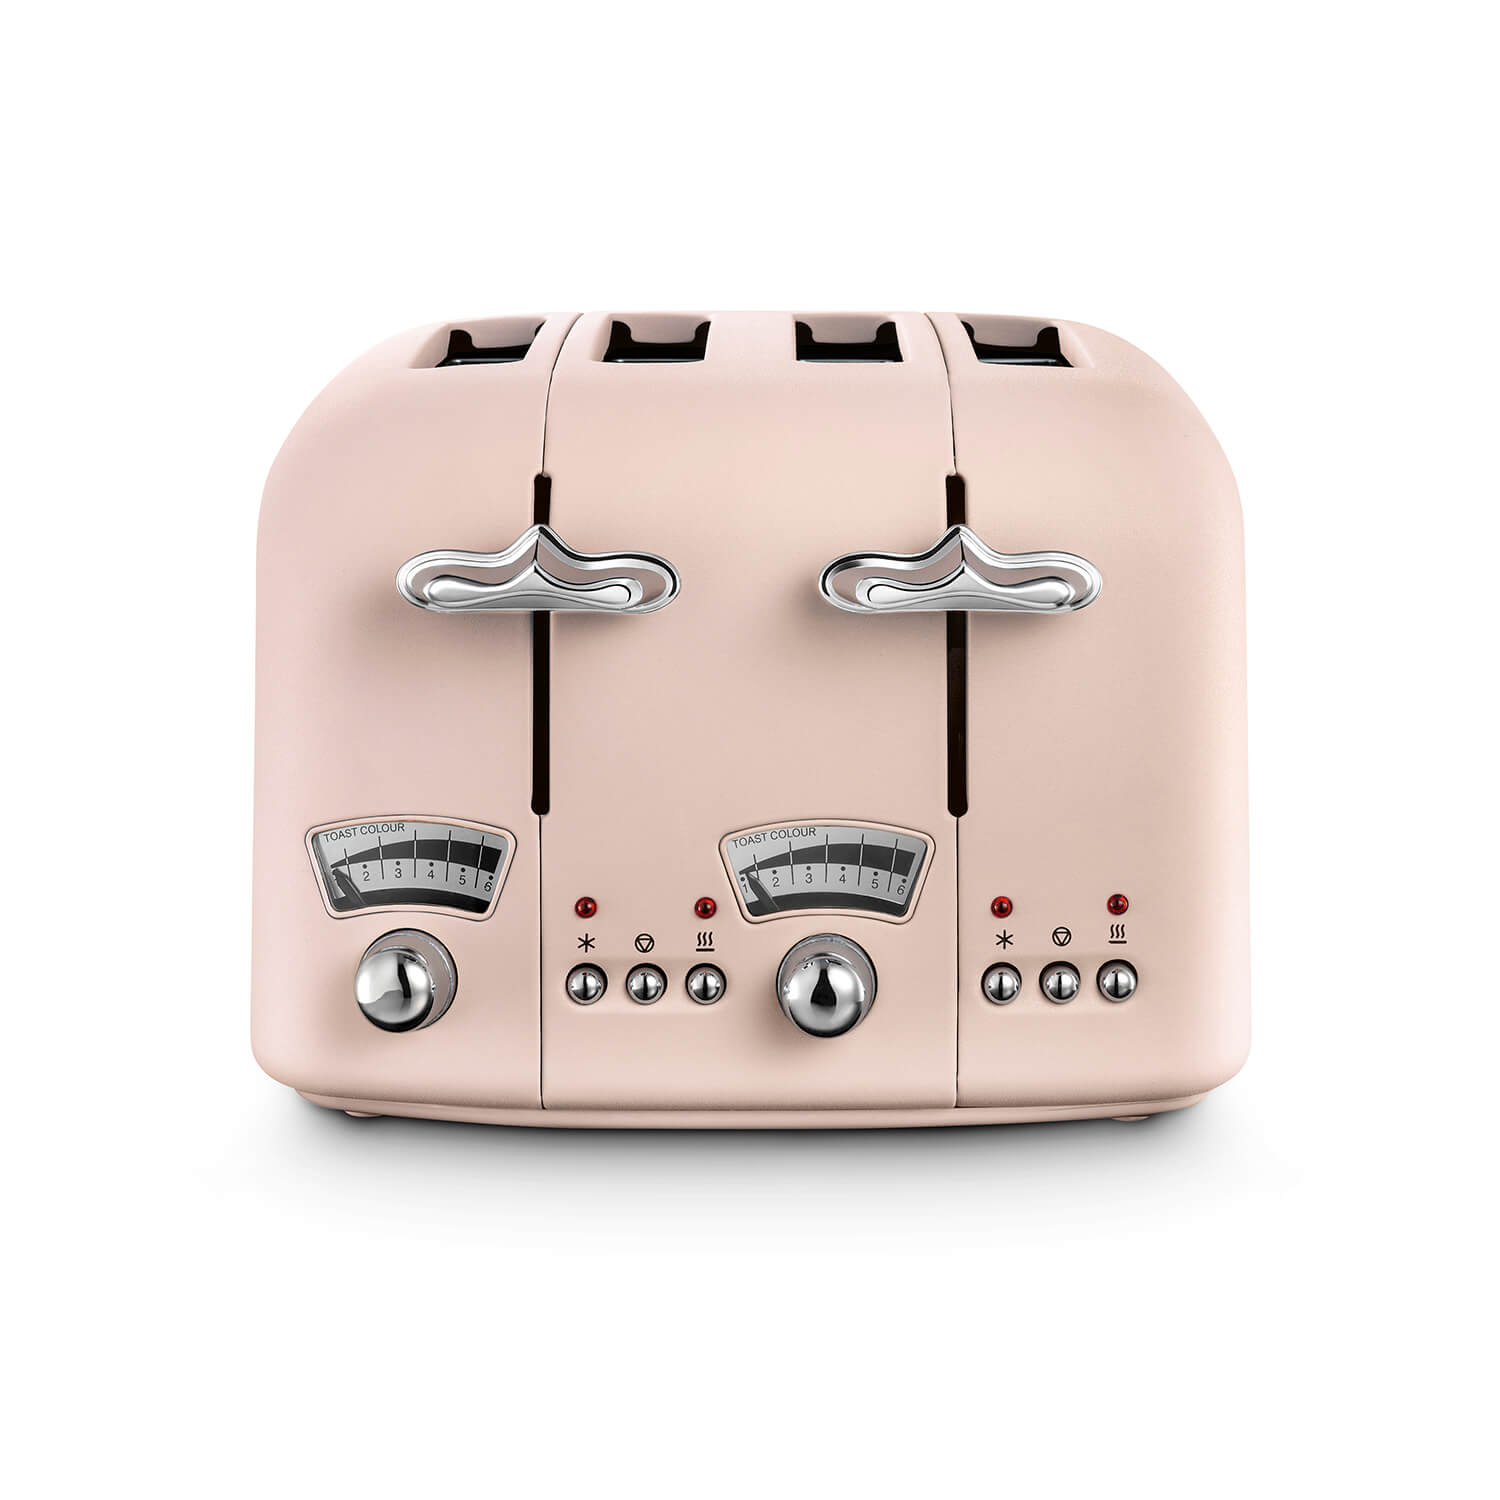 Delonghi 4-Slice Toaster - Pink | CT04PK 1 Shaws Department Stores